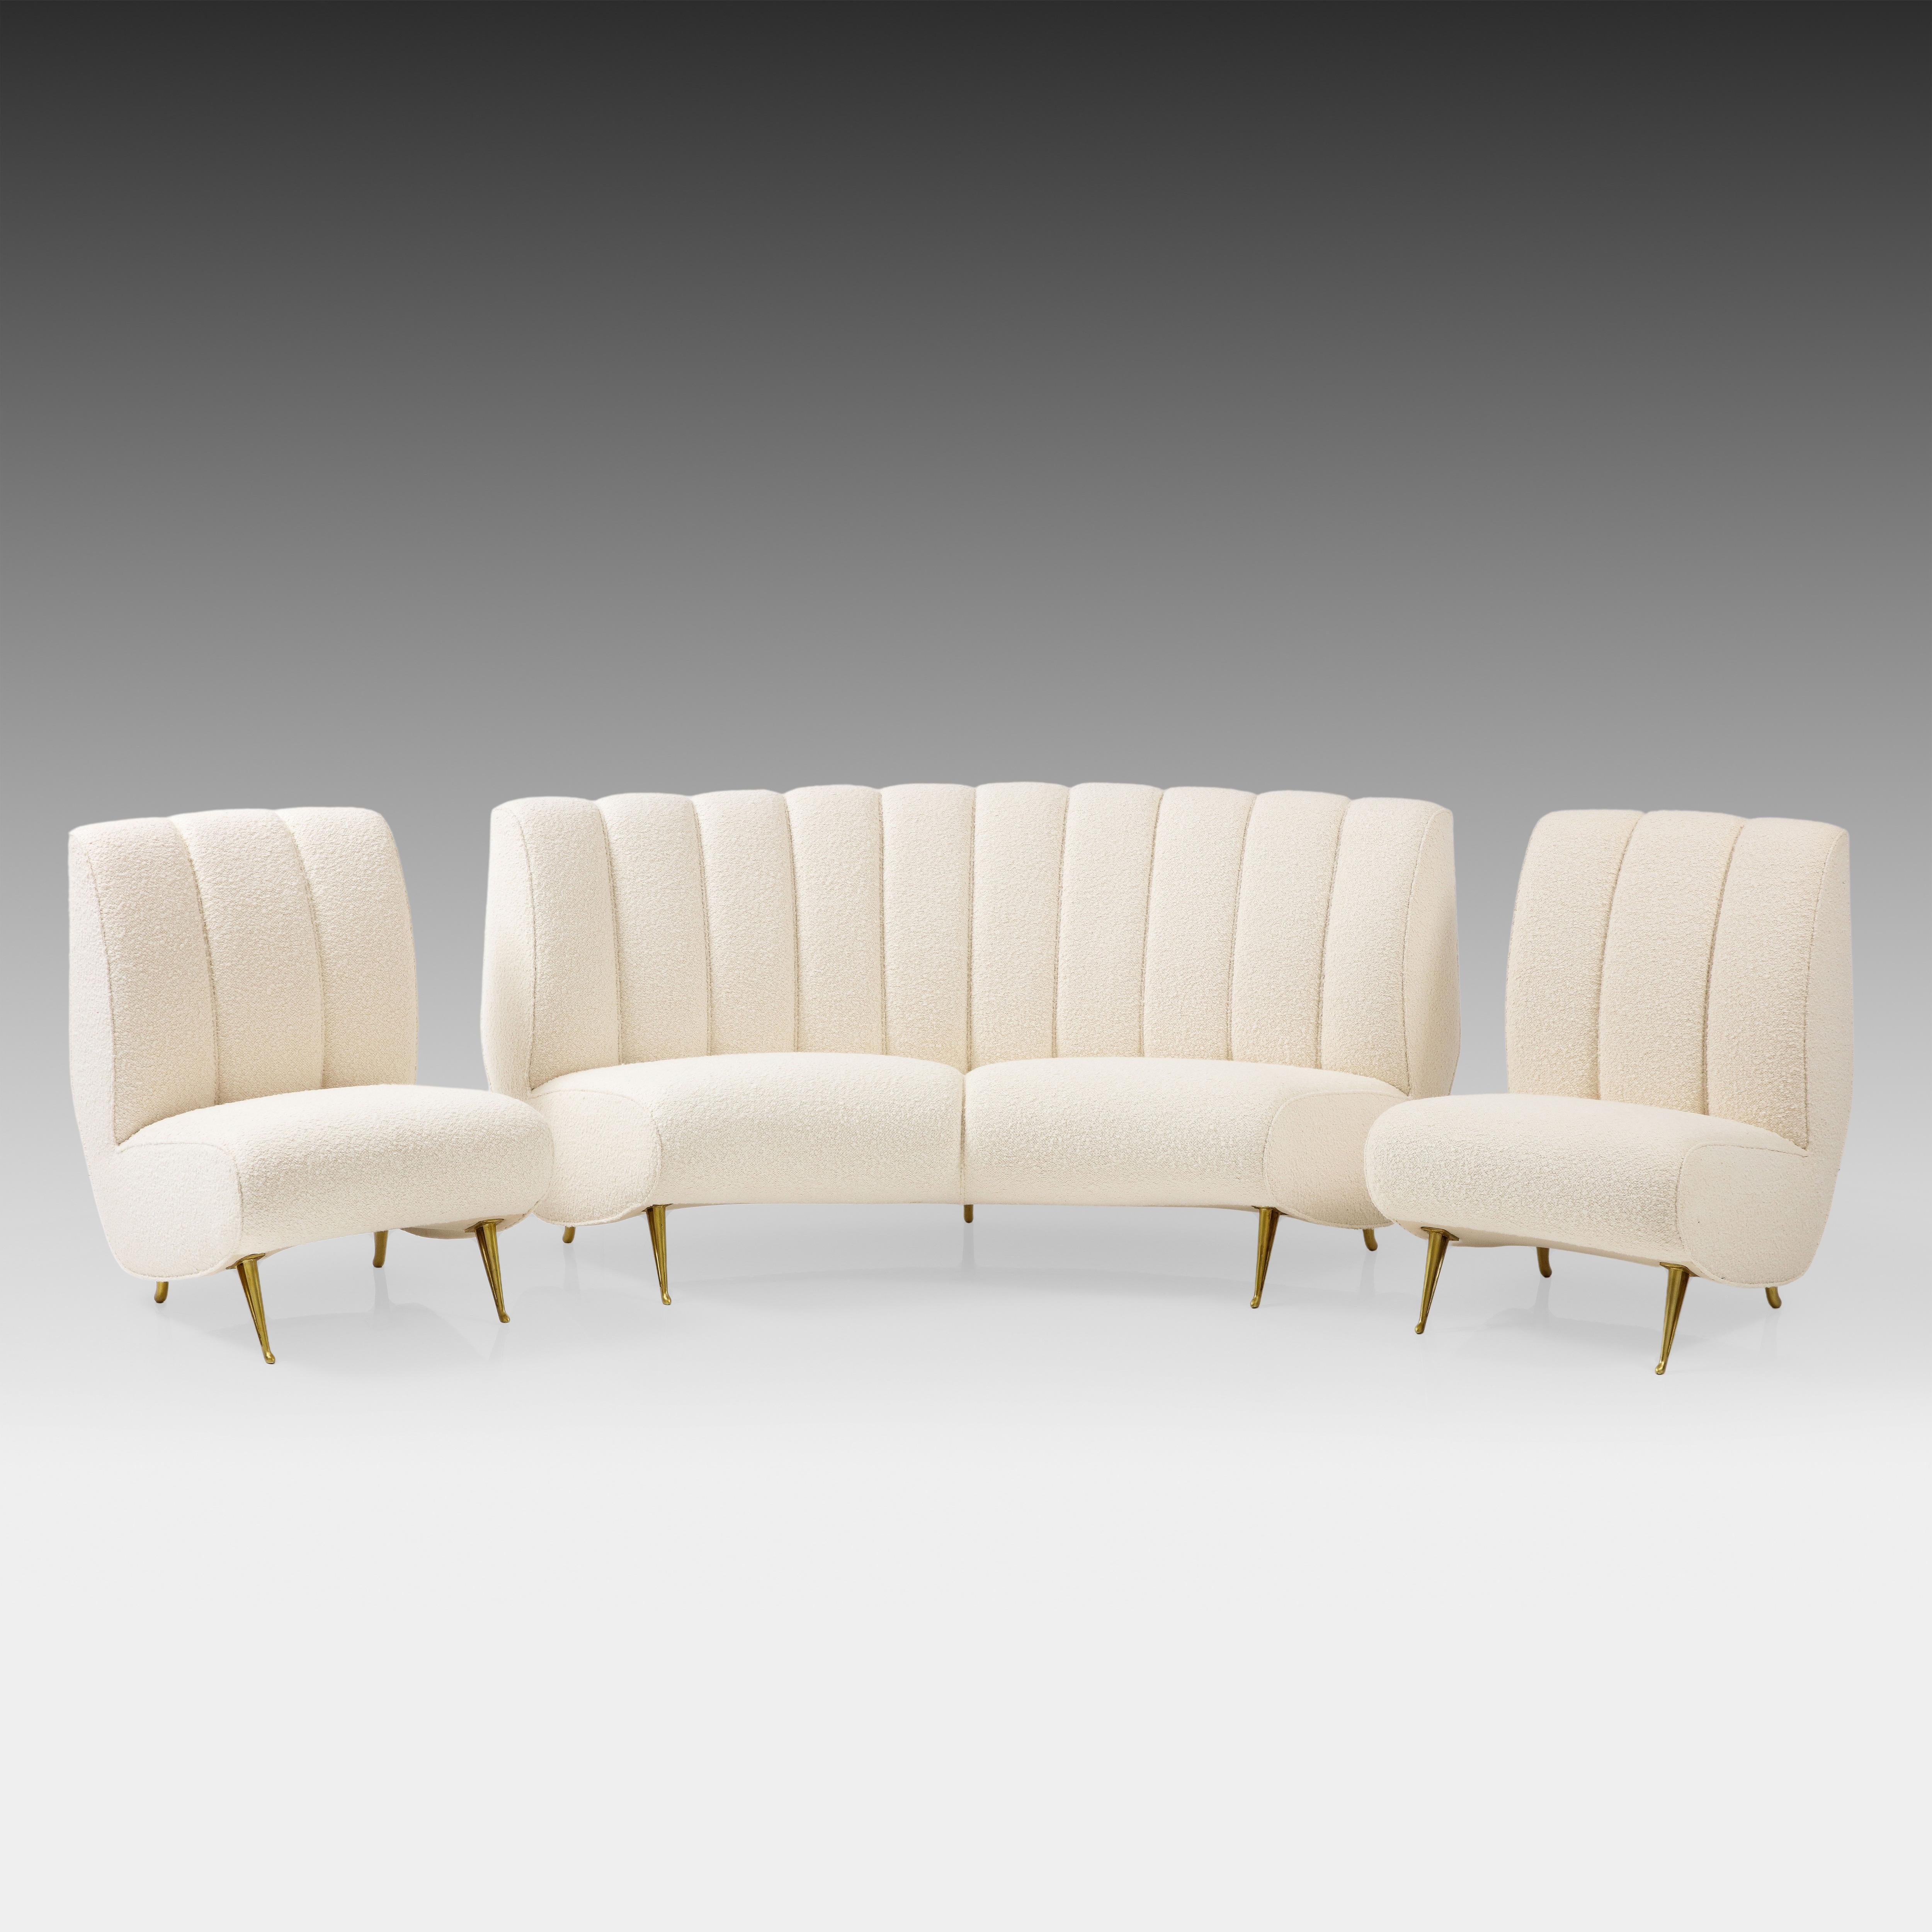 ISA Bergamo Rare Curved Settee in Ivory Bouclé, Italy, 1950s For Sale 9